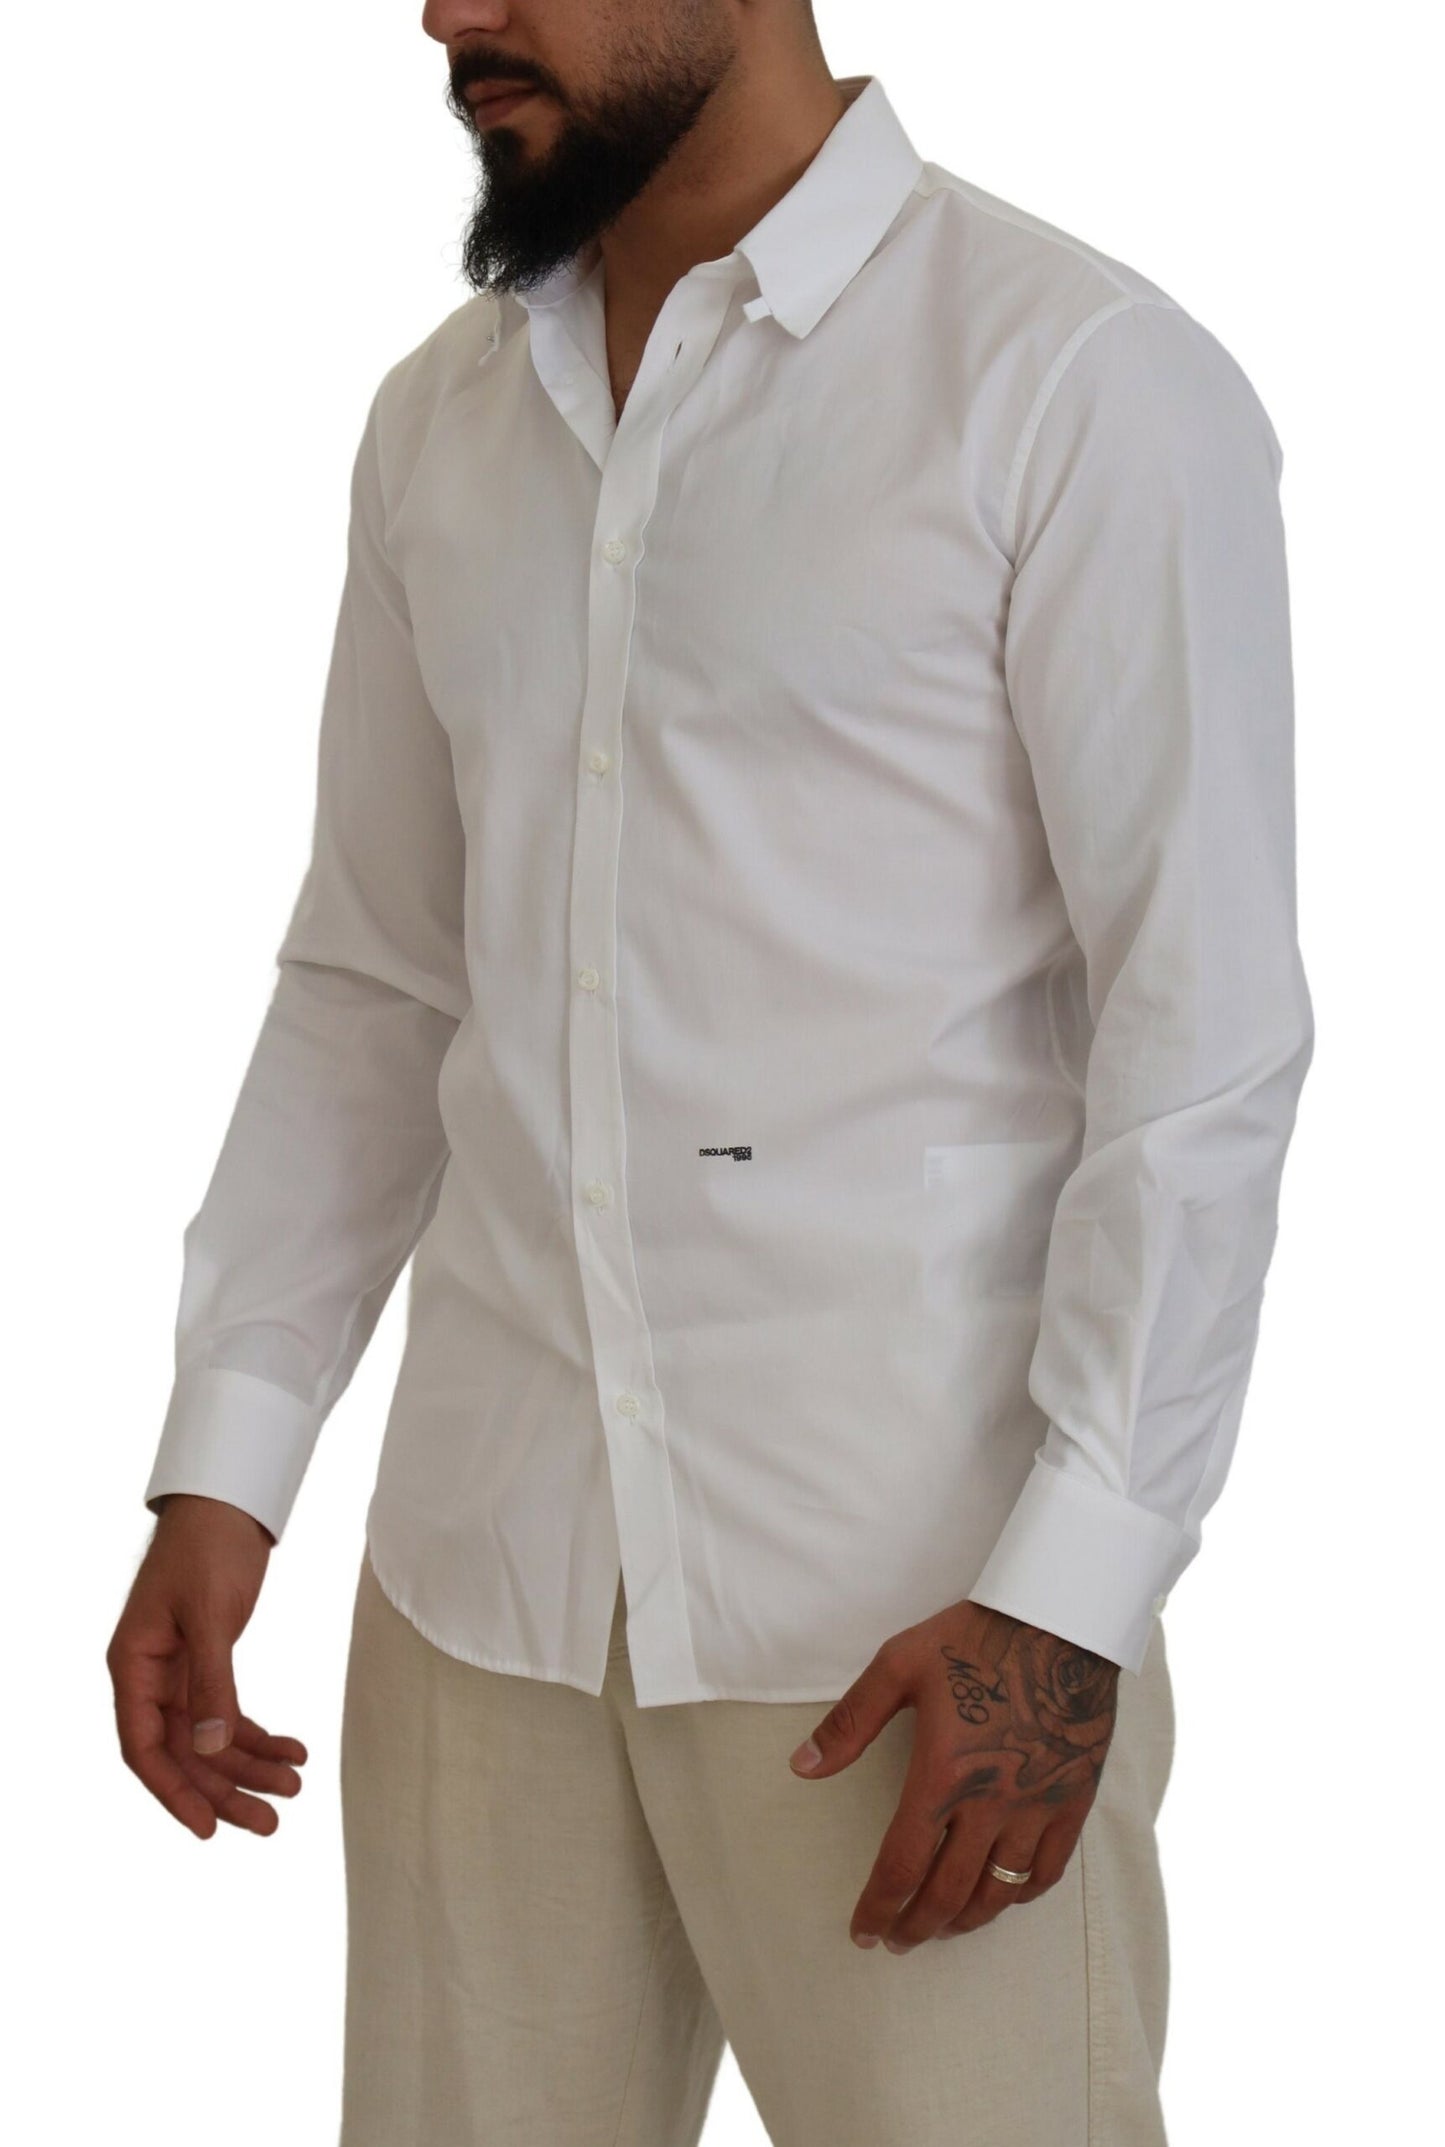 White Cotton Collared Long Sleeves Formal Shirt